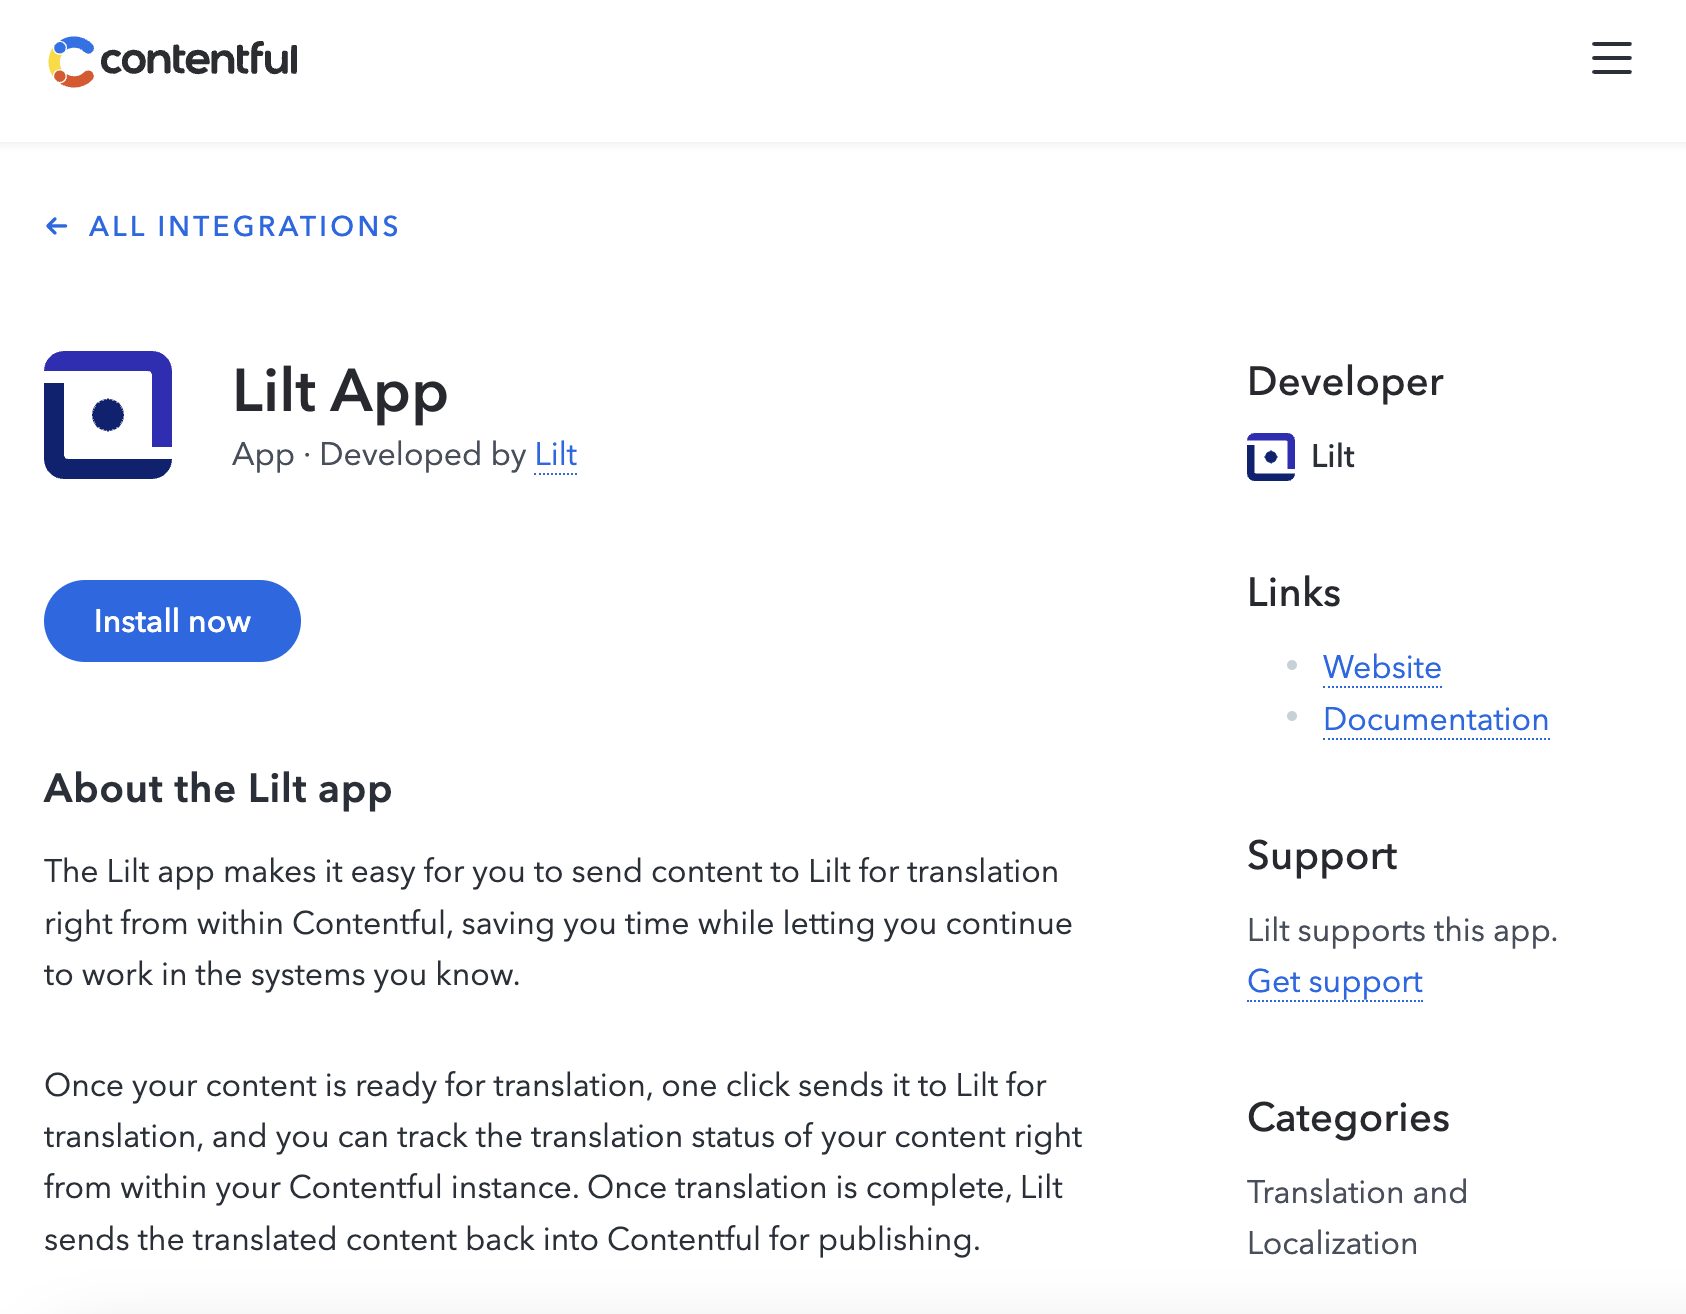 LILT is live in the Contentful App Store